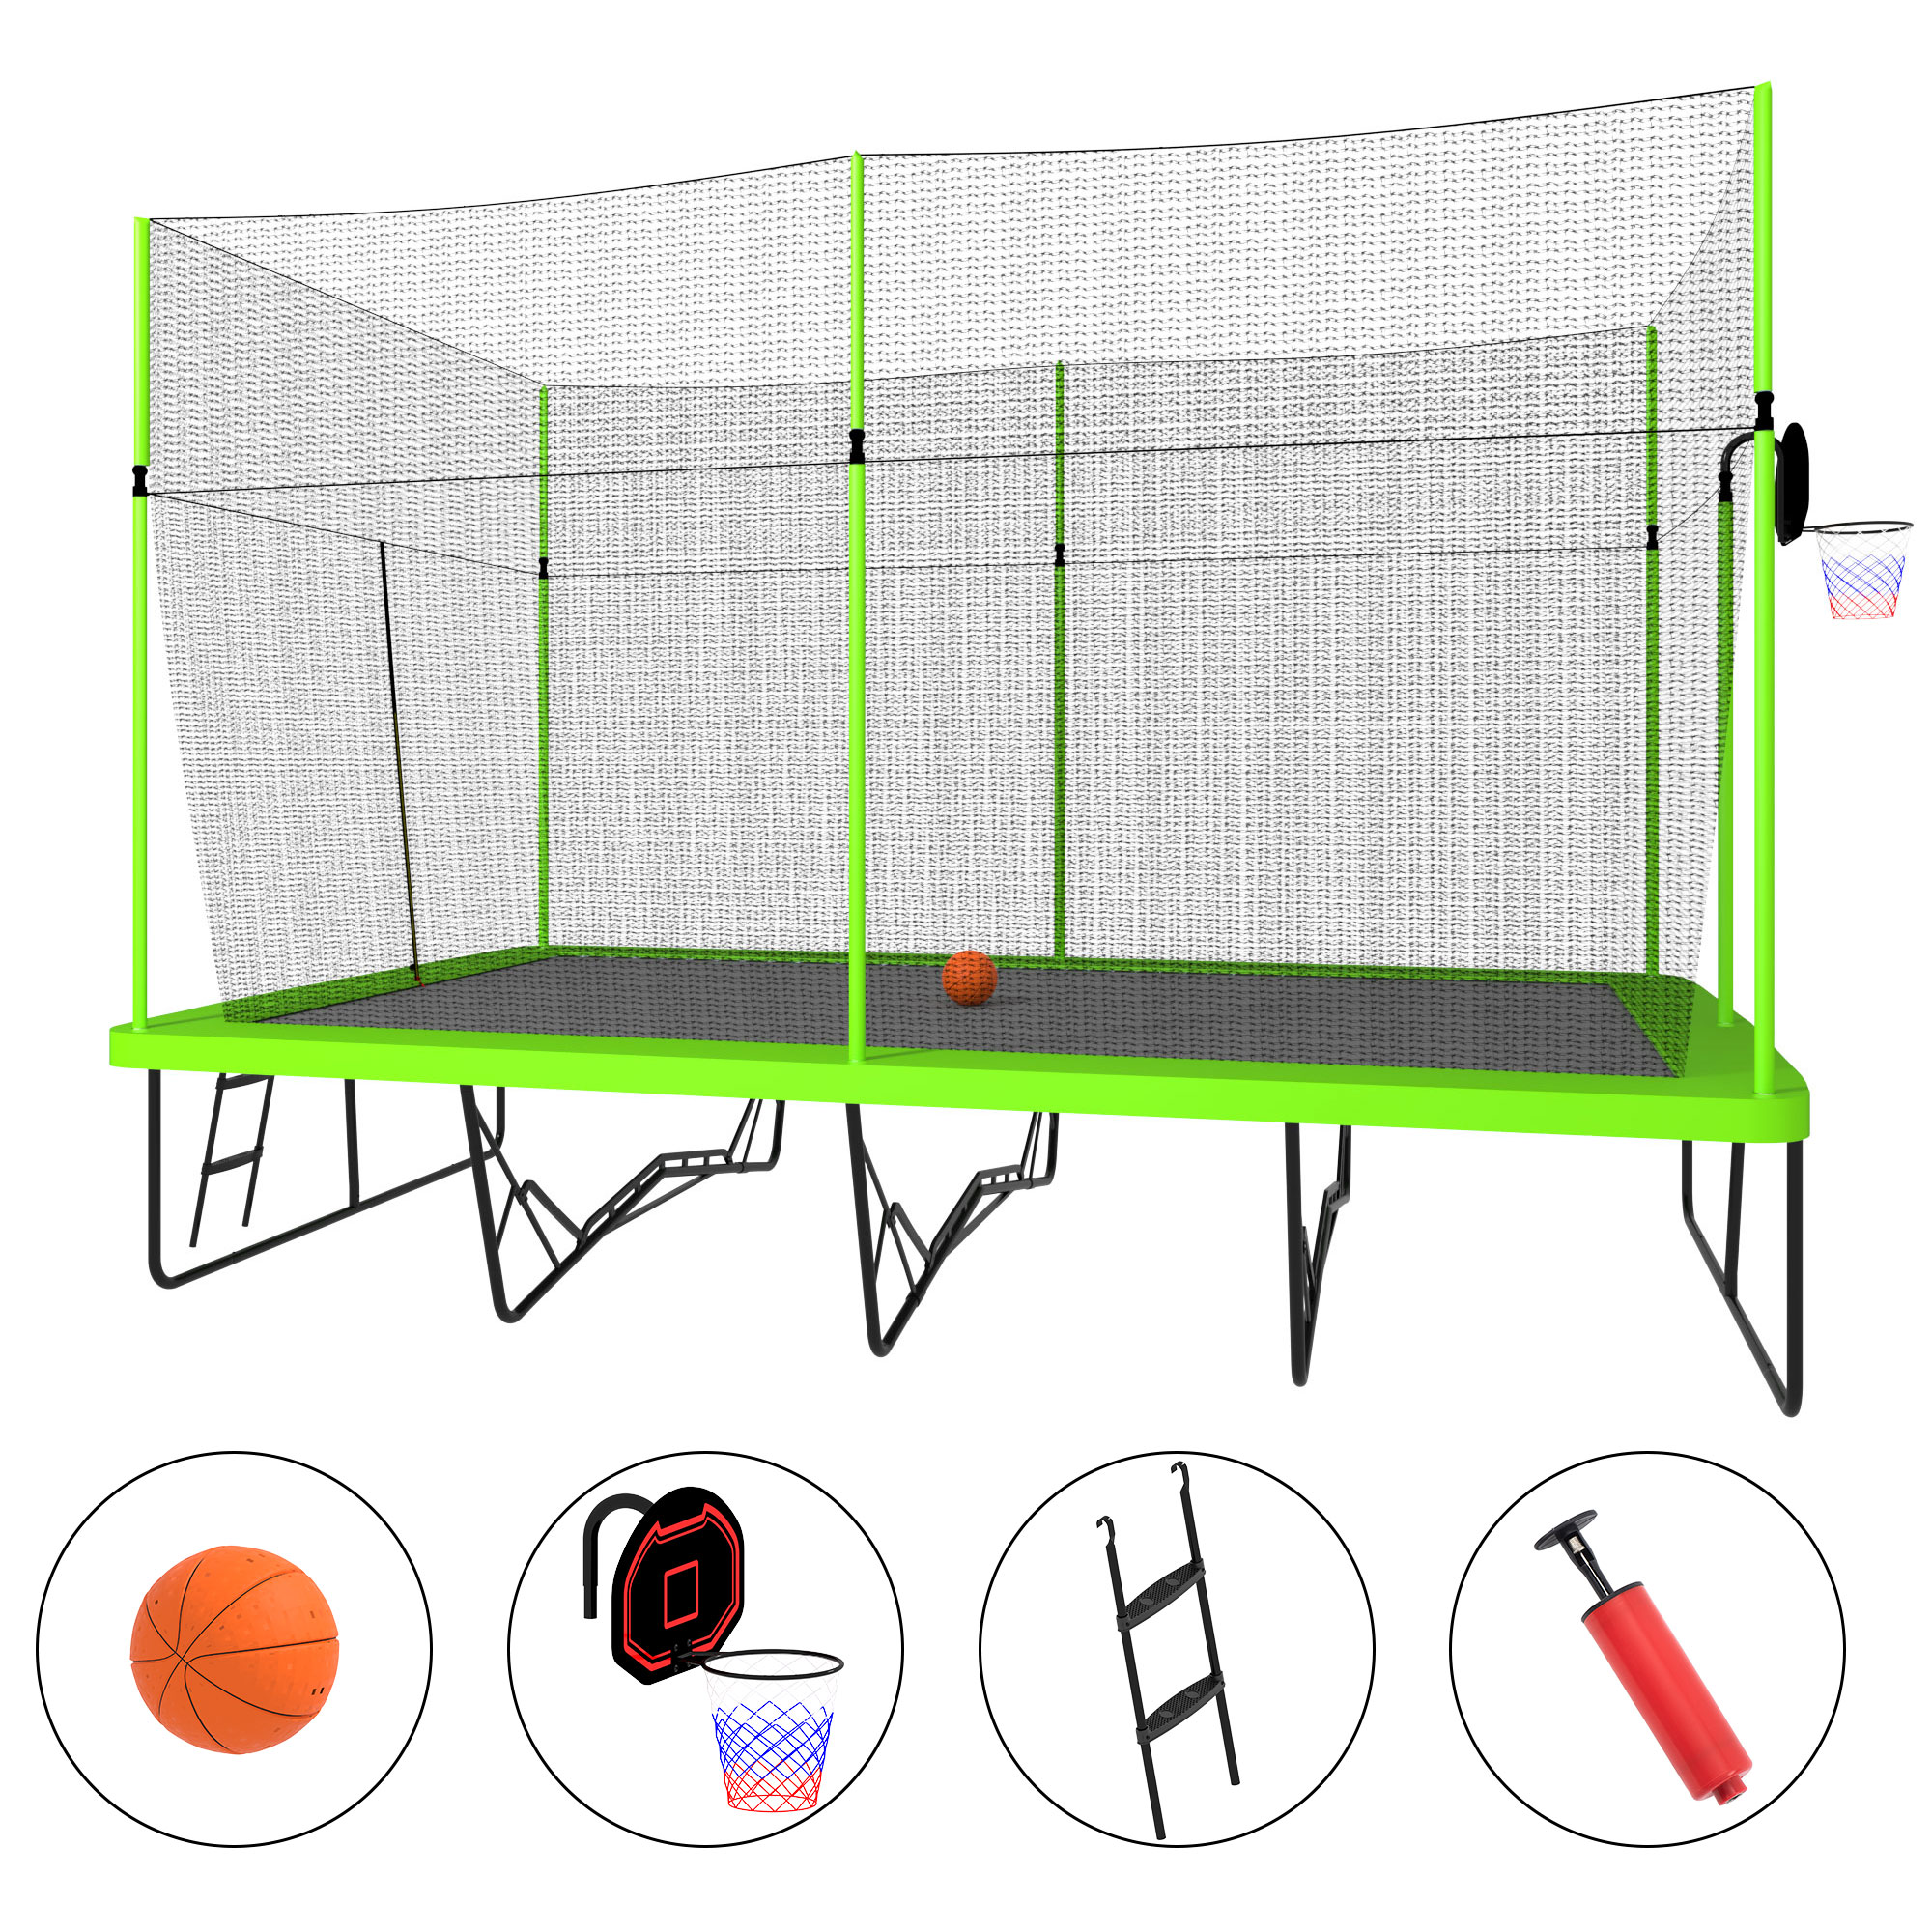 Dcenta 10ft by 17ft Rectangule Trampoline with Green Fabric Black Powder-coated Galvanized Steel Tubes with Basketball Hoop System Ladder - image 1 of 7